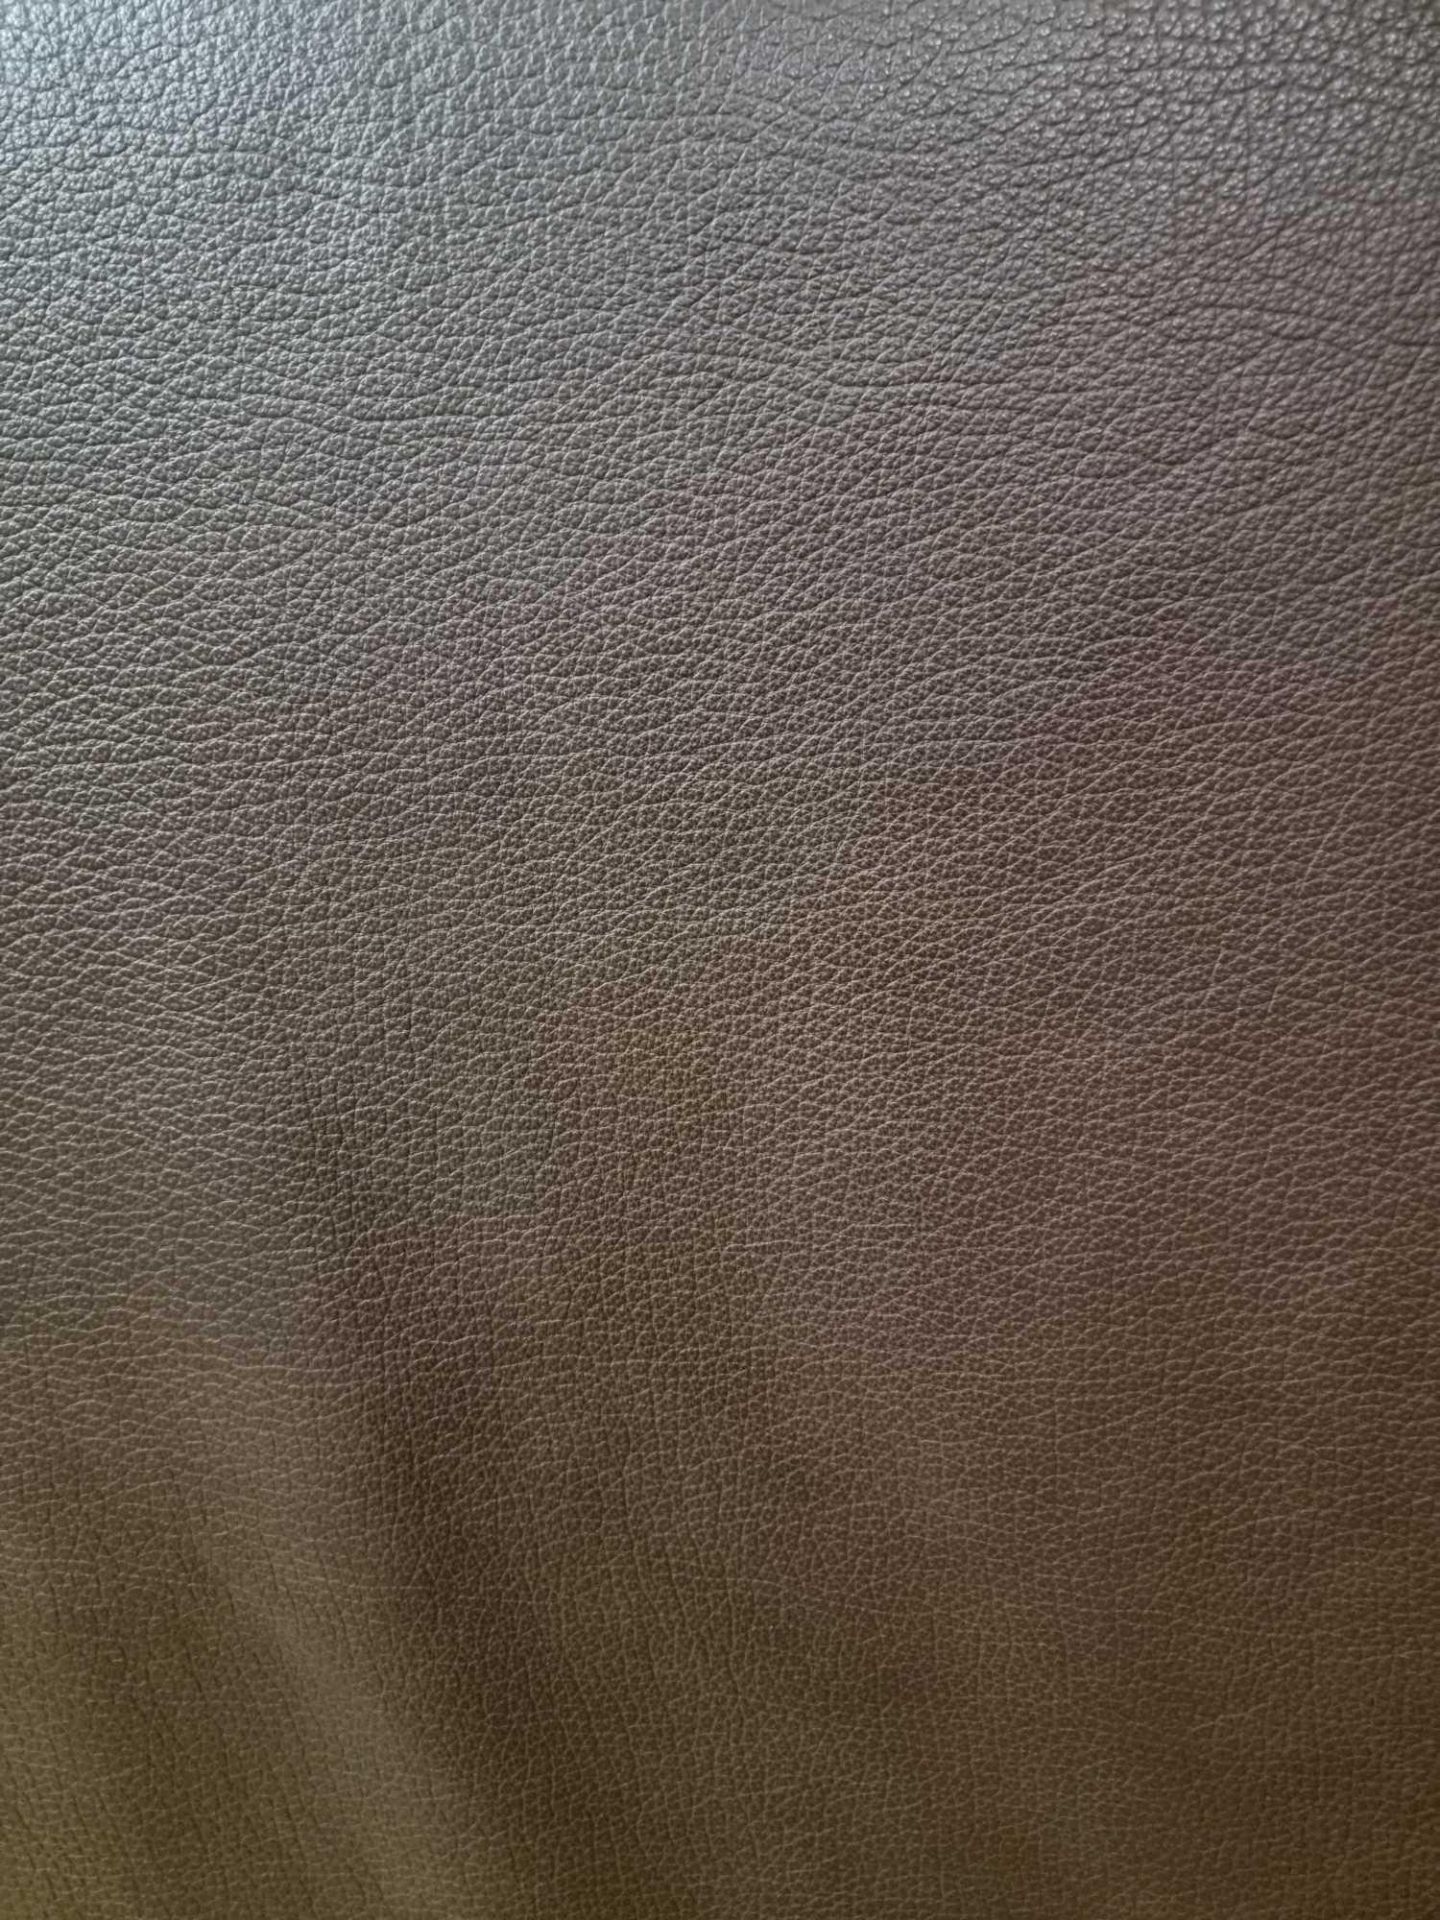 Mastrotto Hudson Chocolate Leather Hide approximately 5mÂ² 2.5 x 2cm - Image 2 of 3